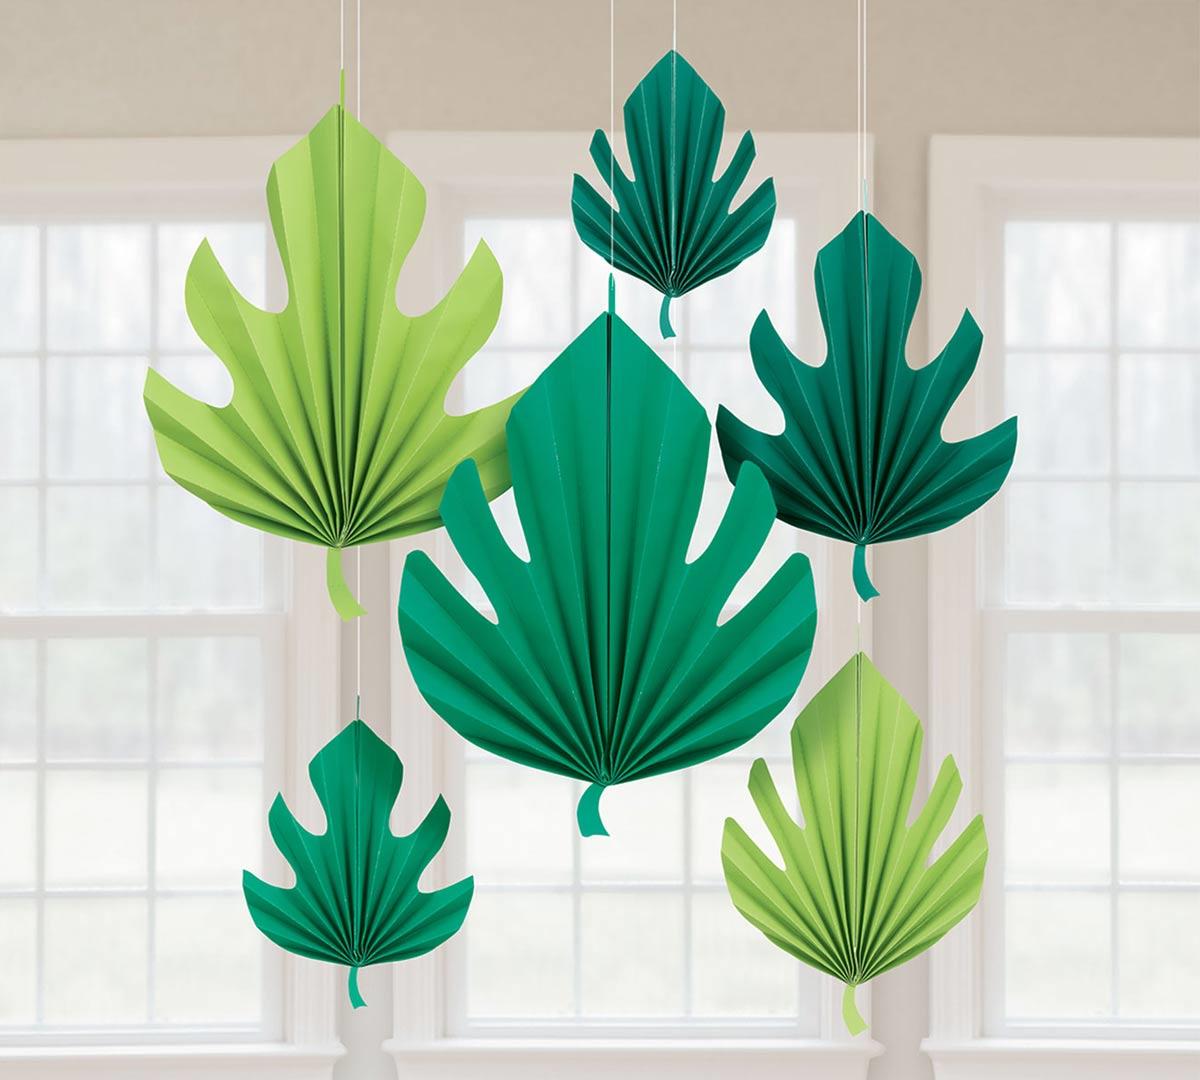 Hawaiian Palm Leaf Shaped Fan Decorations pk6 in 3 sizes by Amscan 290094 available her at Karnival Costumes online party shop